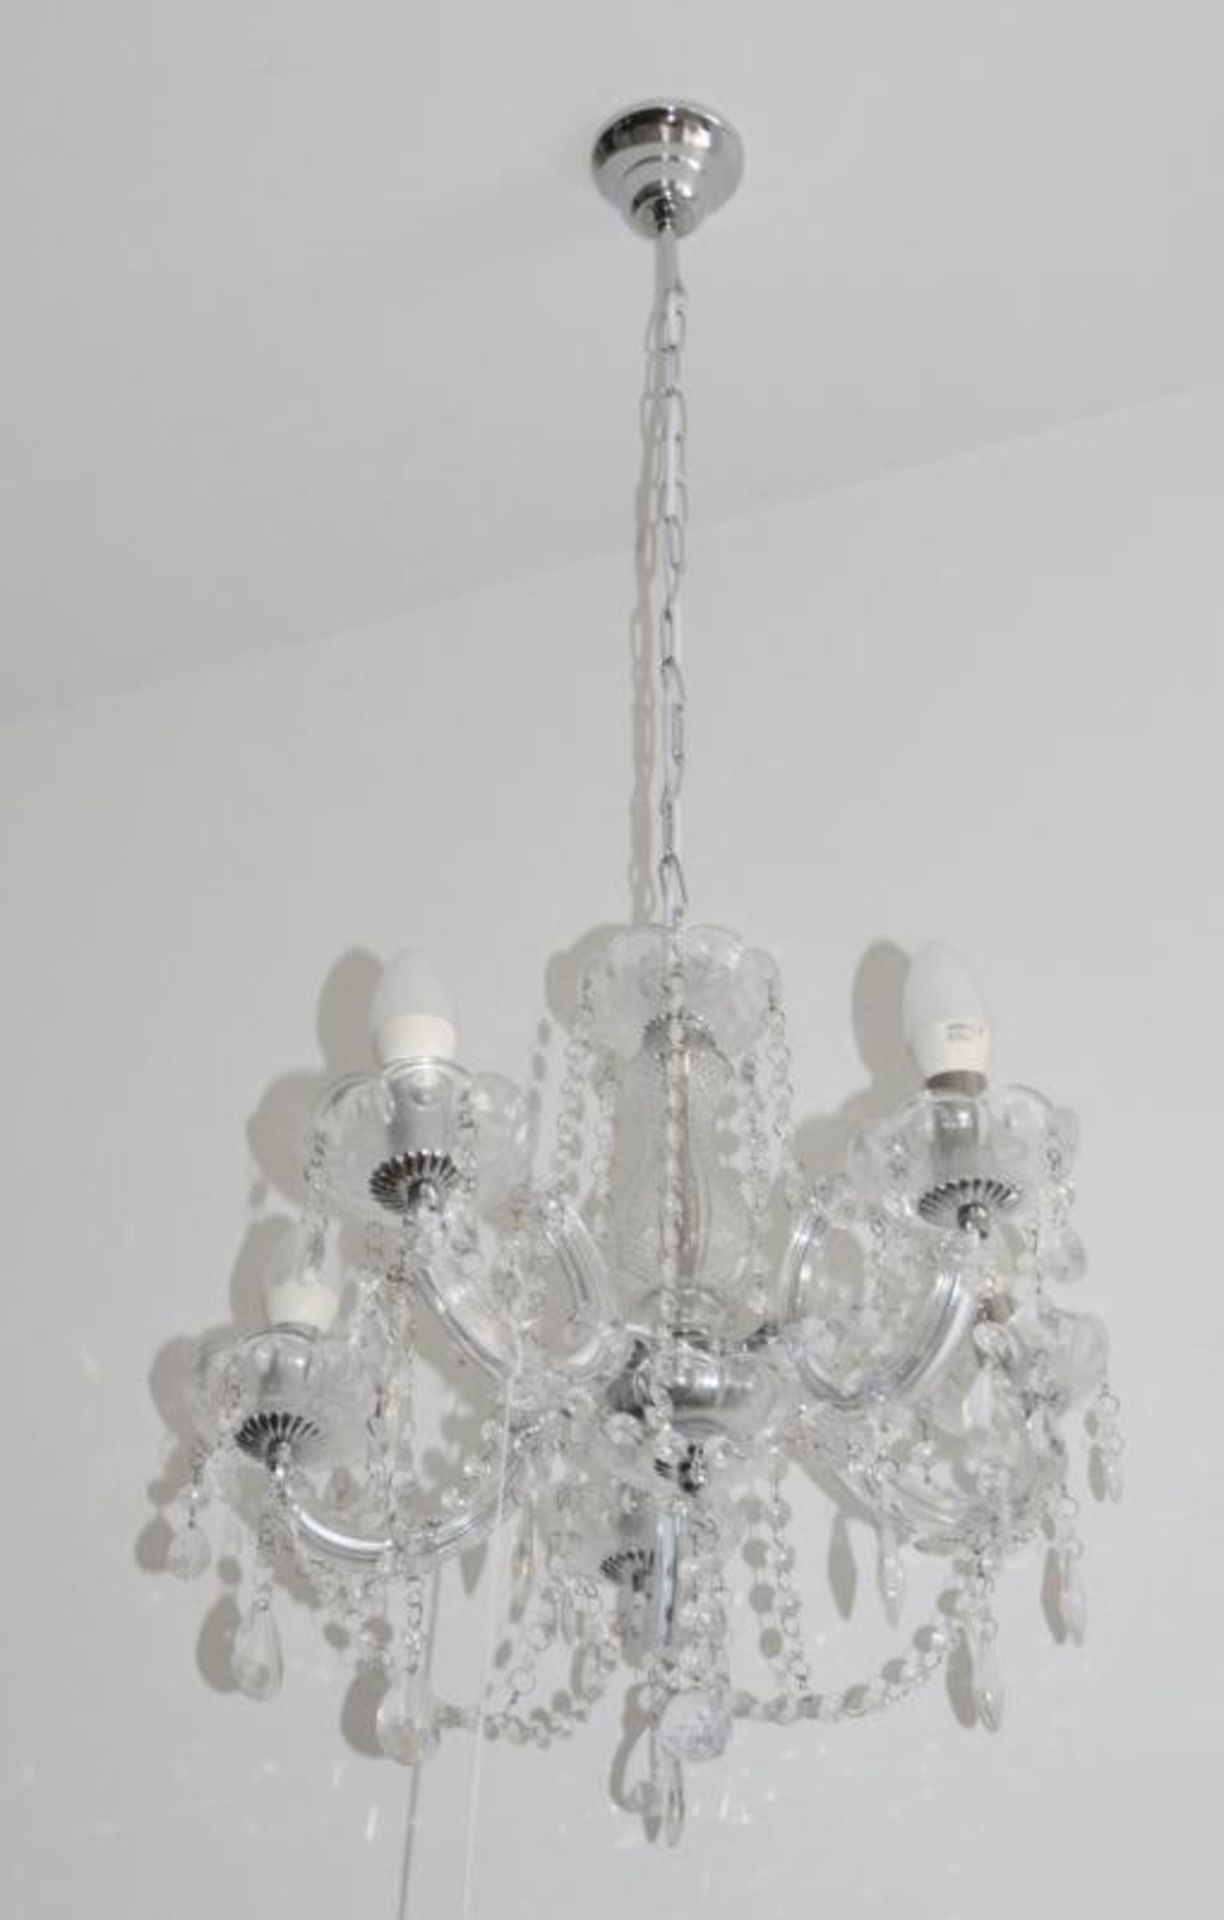 1 x MARIE THERESE Chrome 5 Light Chandelier With Crystal Drops - Ex Display Stock - CL298 - Ref: J13 - Image 4 of 4